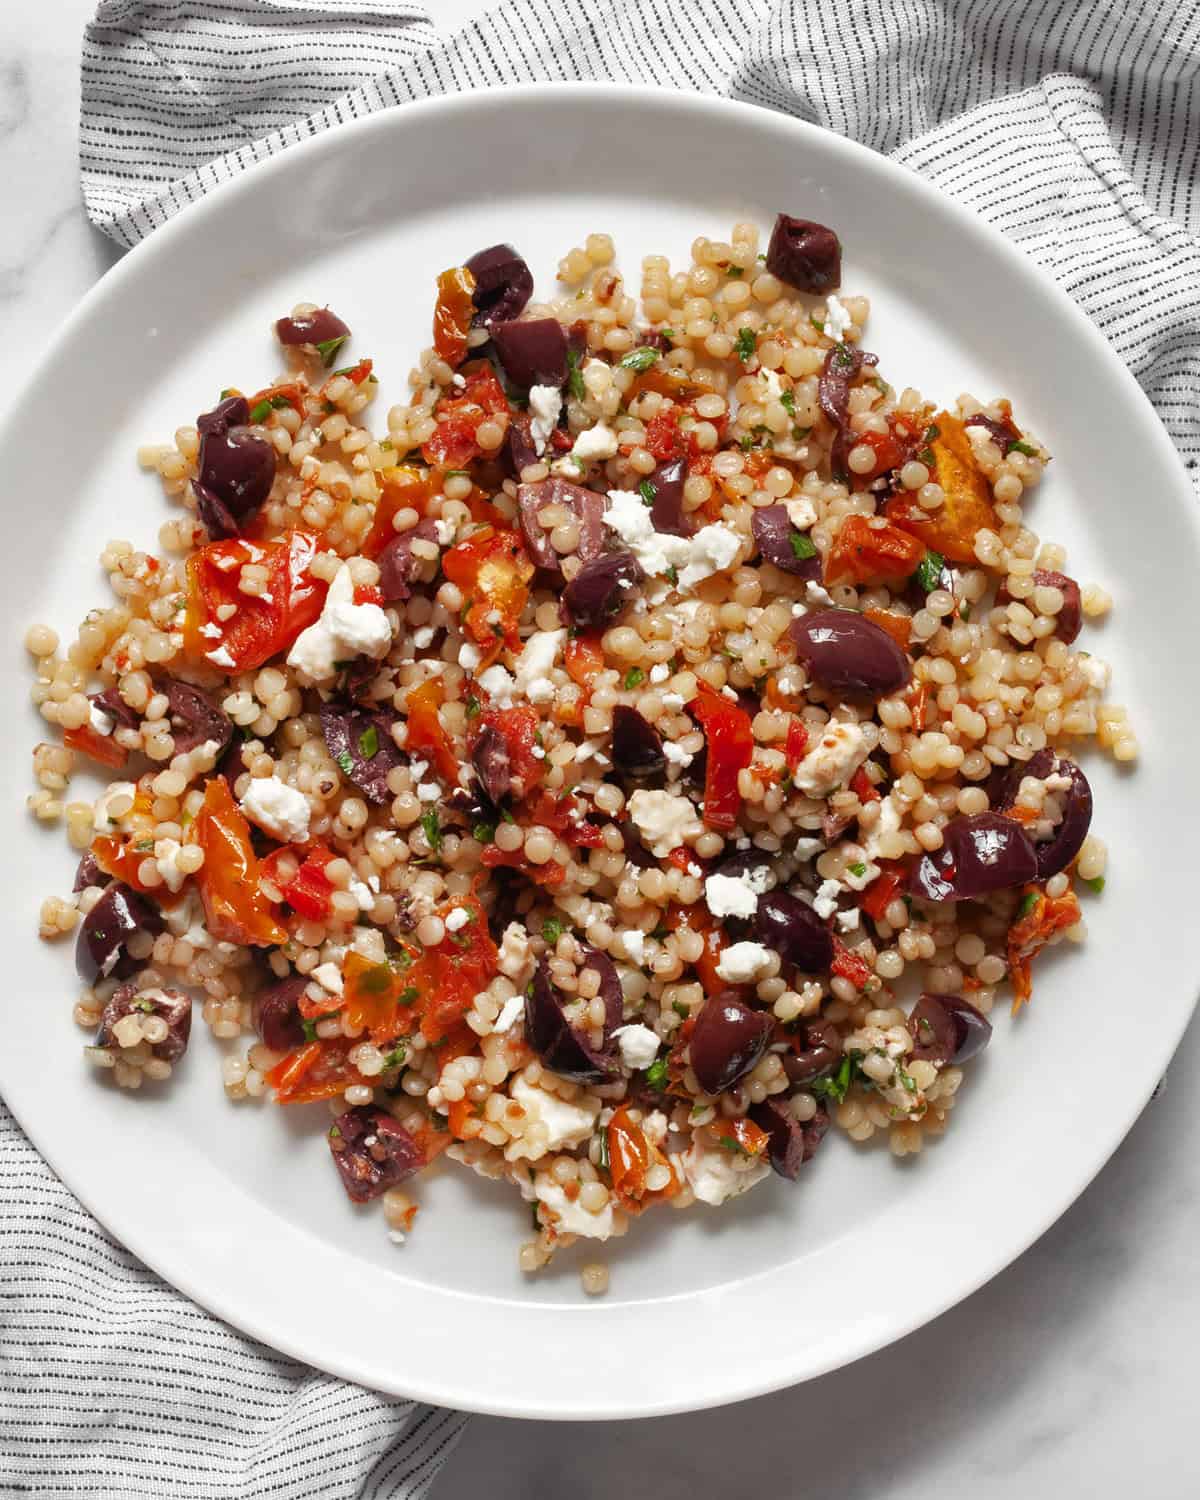 Tomato olive couscous on a plate.